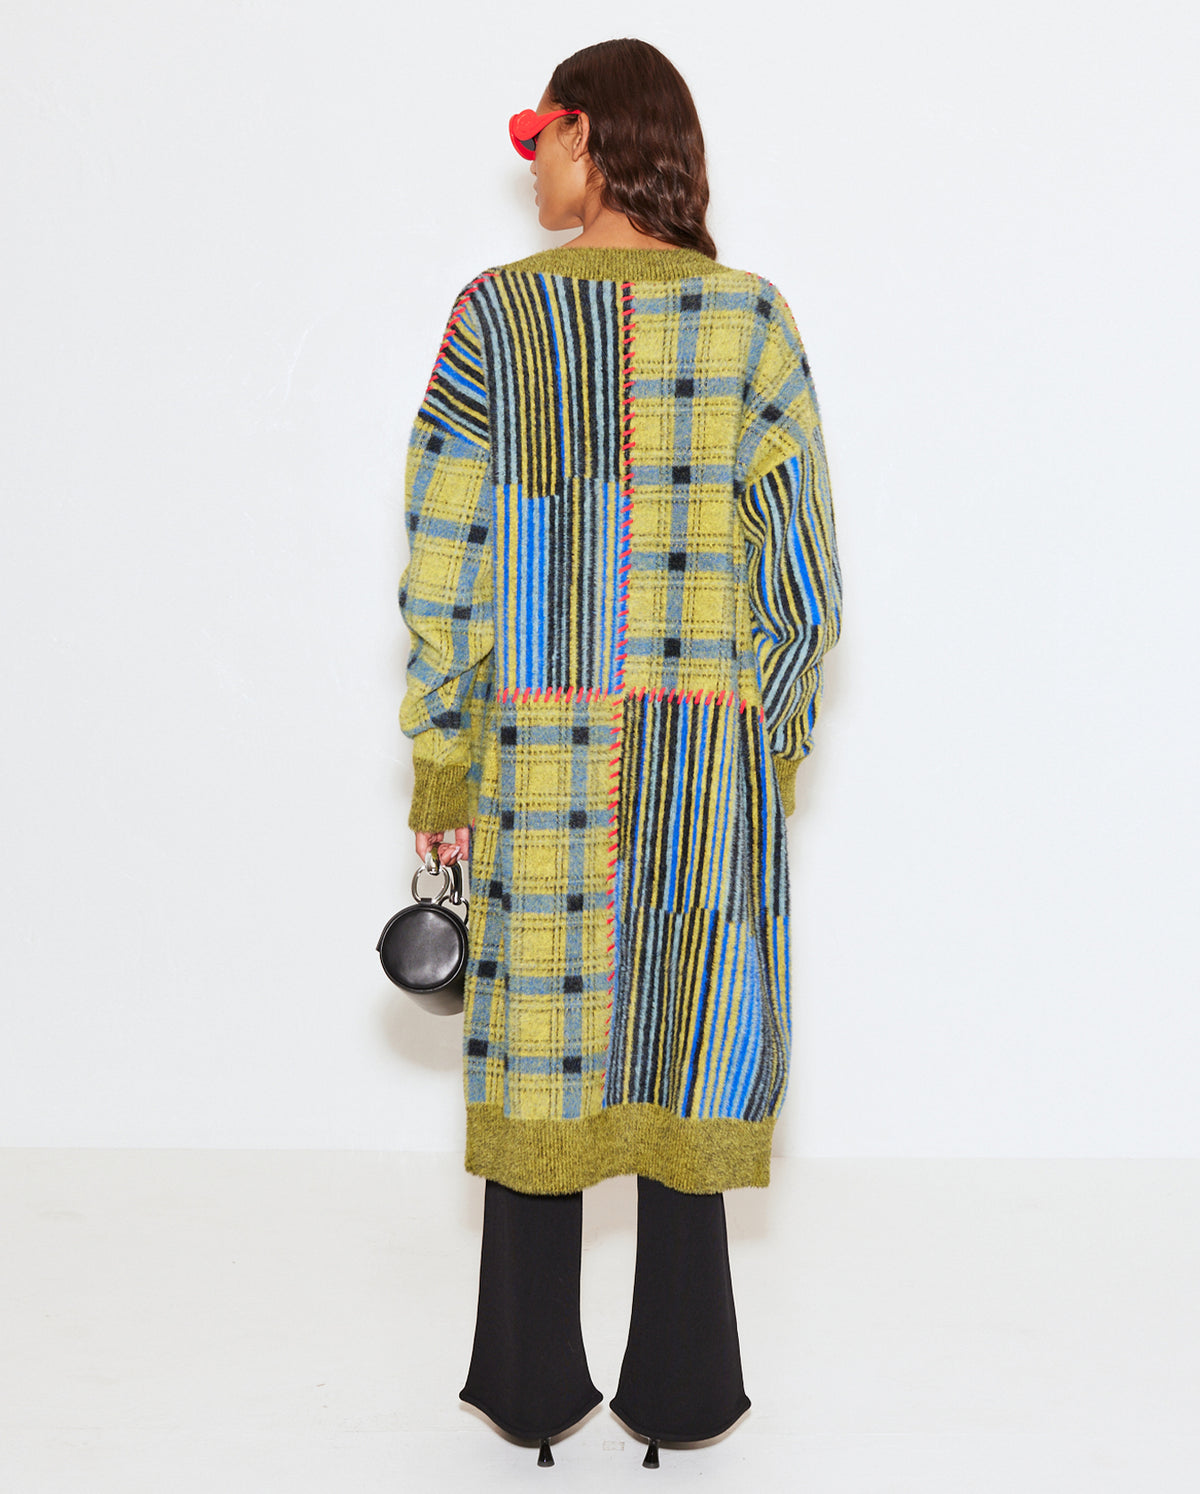 Castle Cardigan - Yellow Plaid/Stacked Stripe